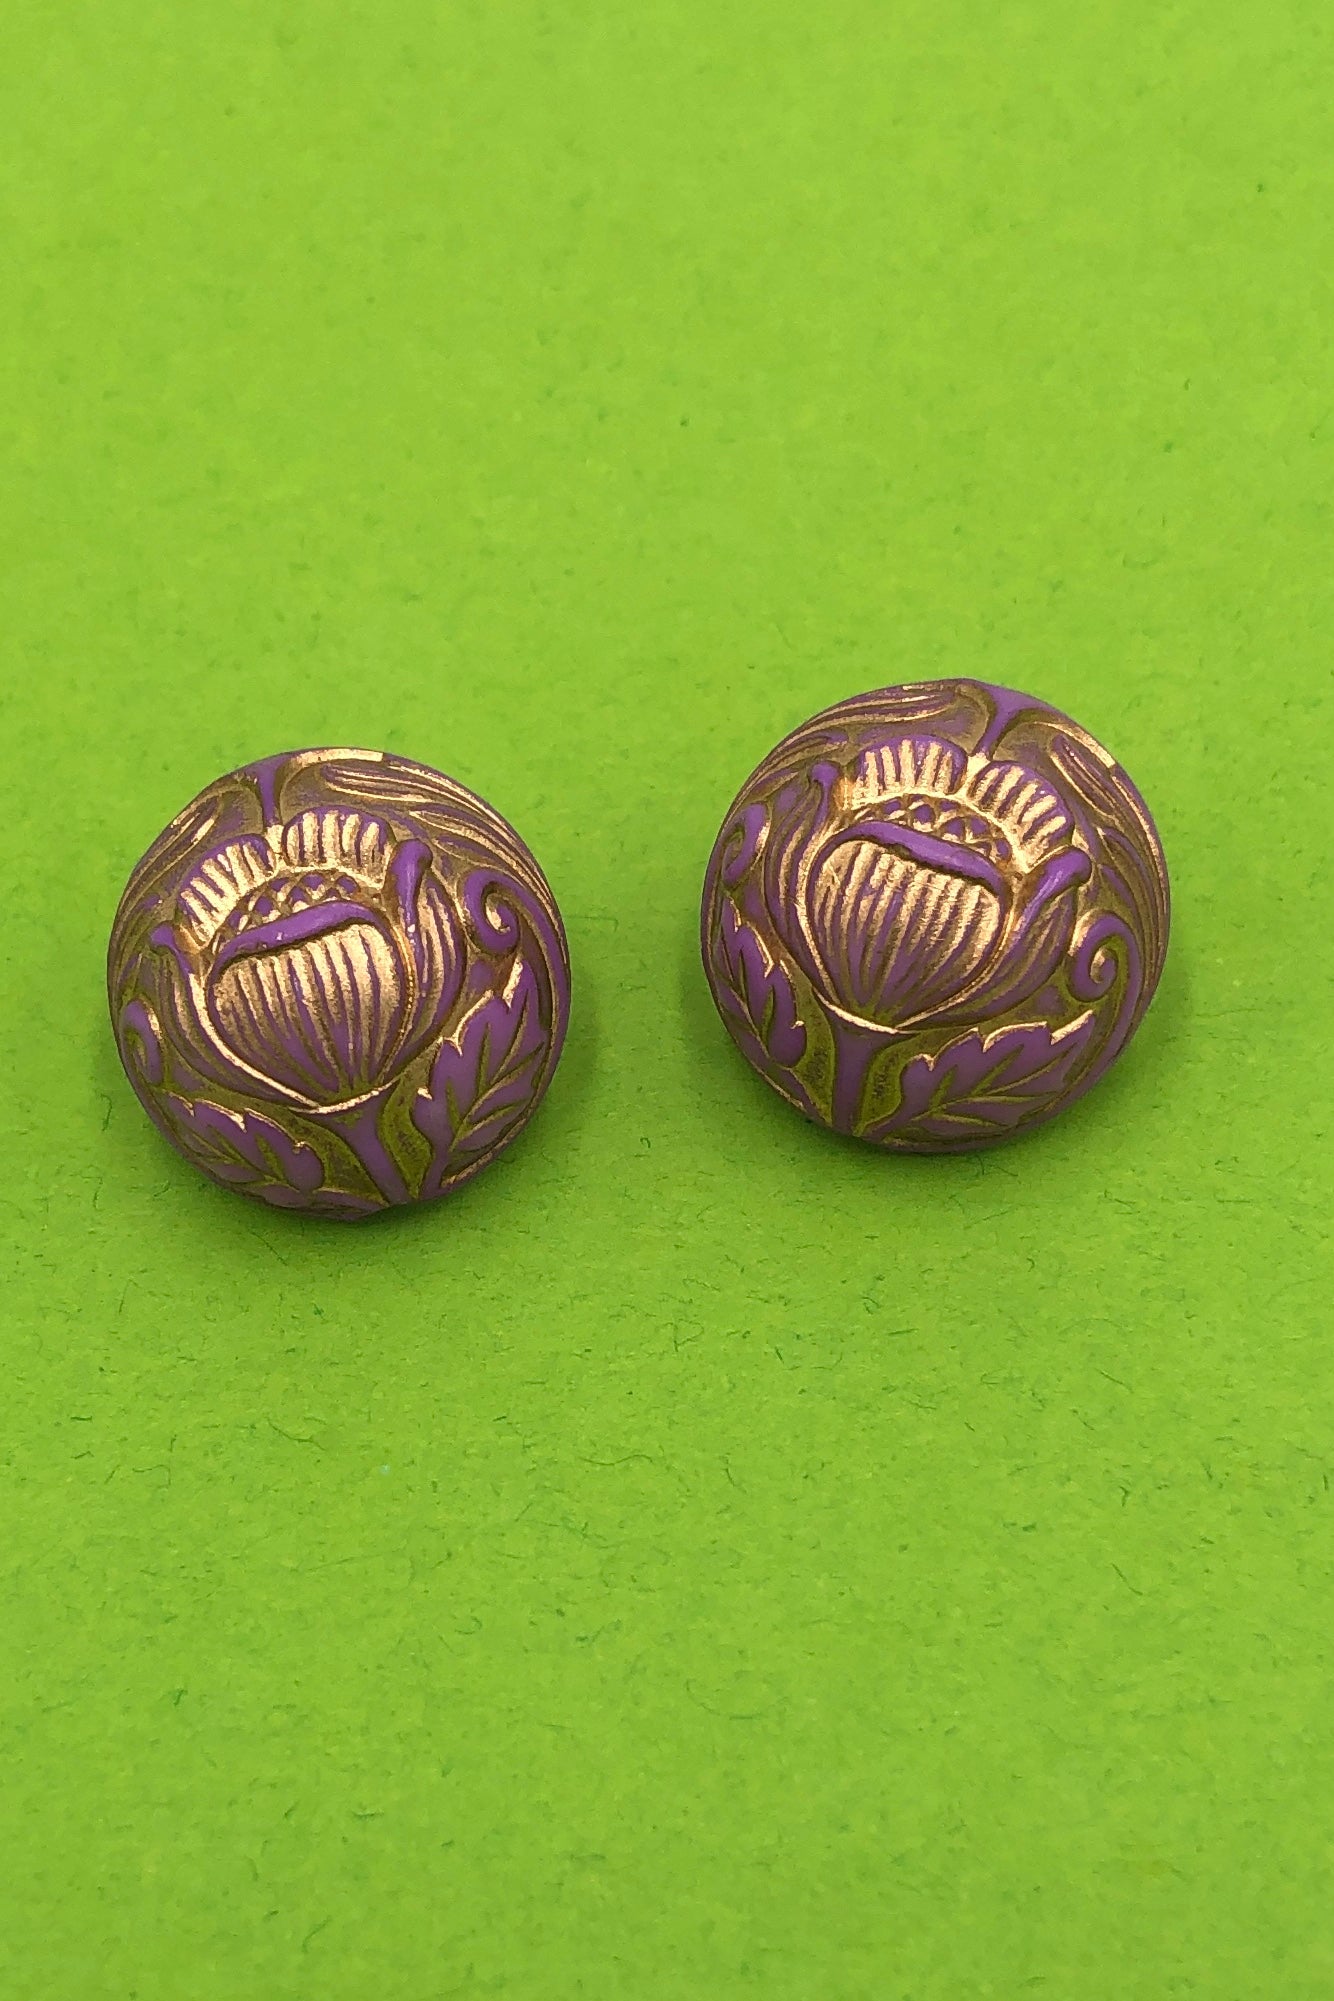 lilac and gold button stud earrings with carved tulips on green background